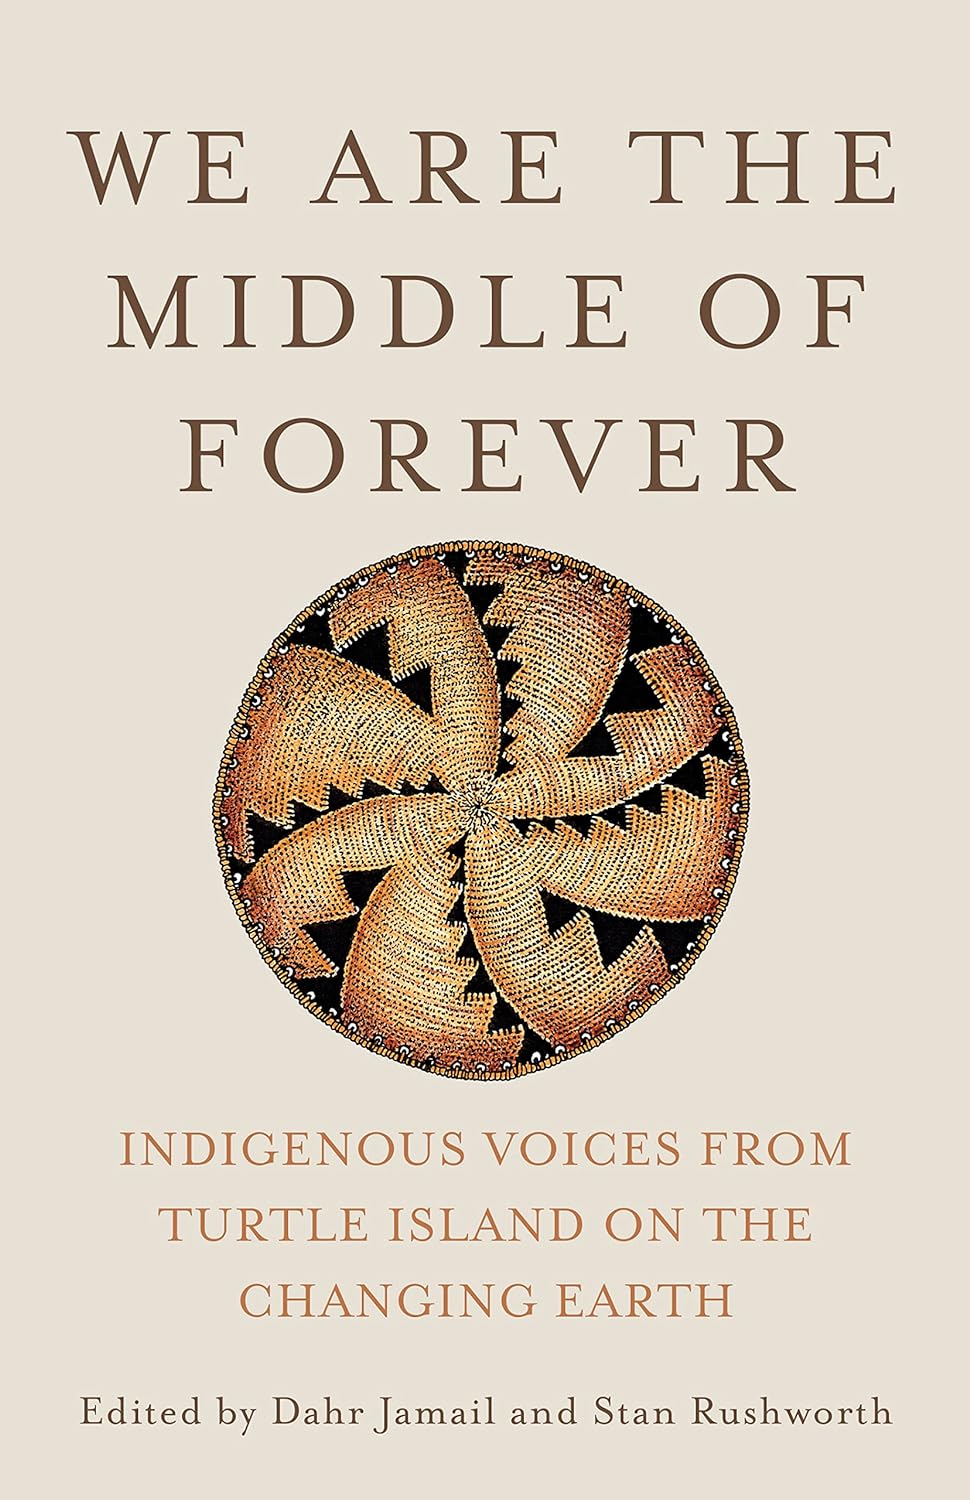 We Are the Middle of Forever: Indigenous Voices from Turtle Island on the Changing Earth edited by Dahr Jamail & Stan Rushworth